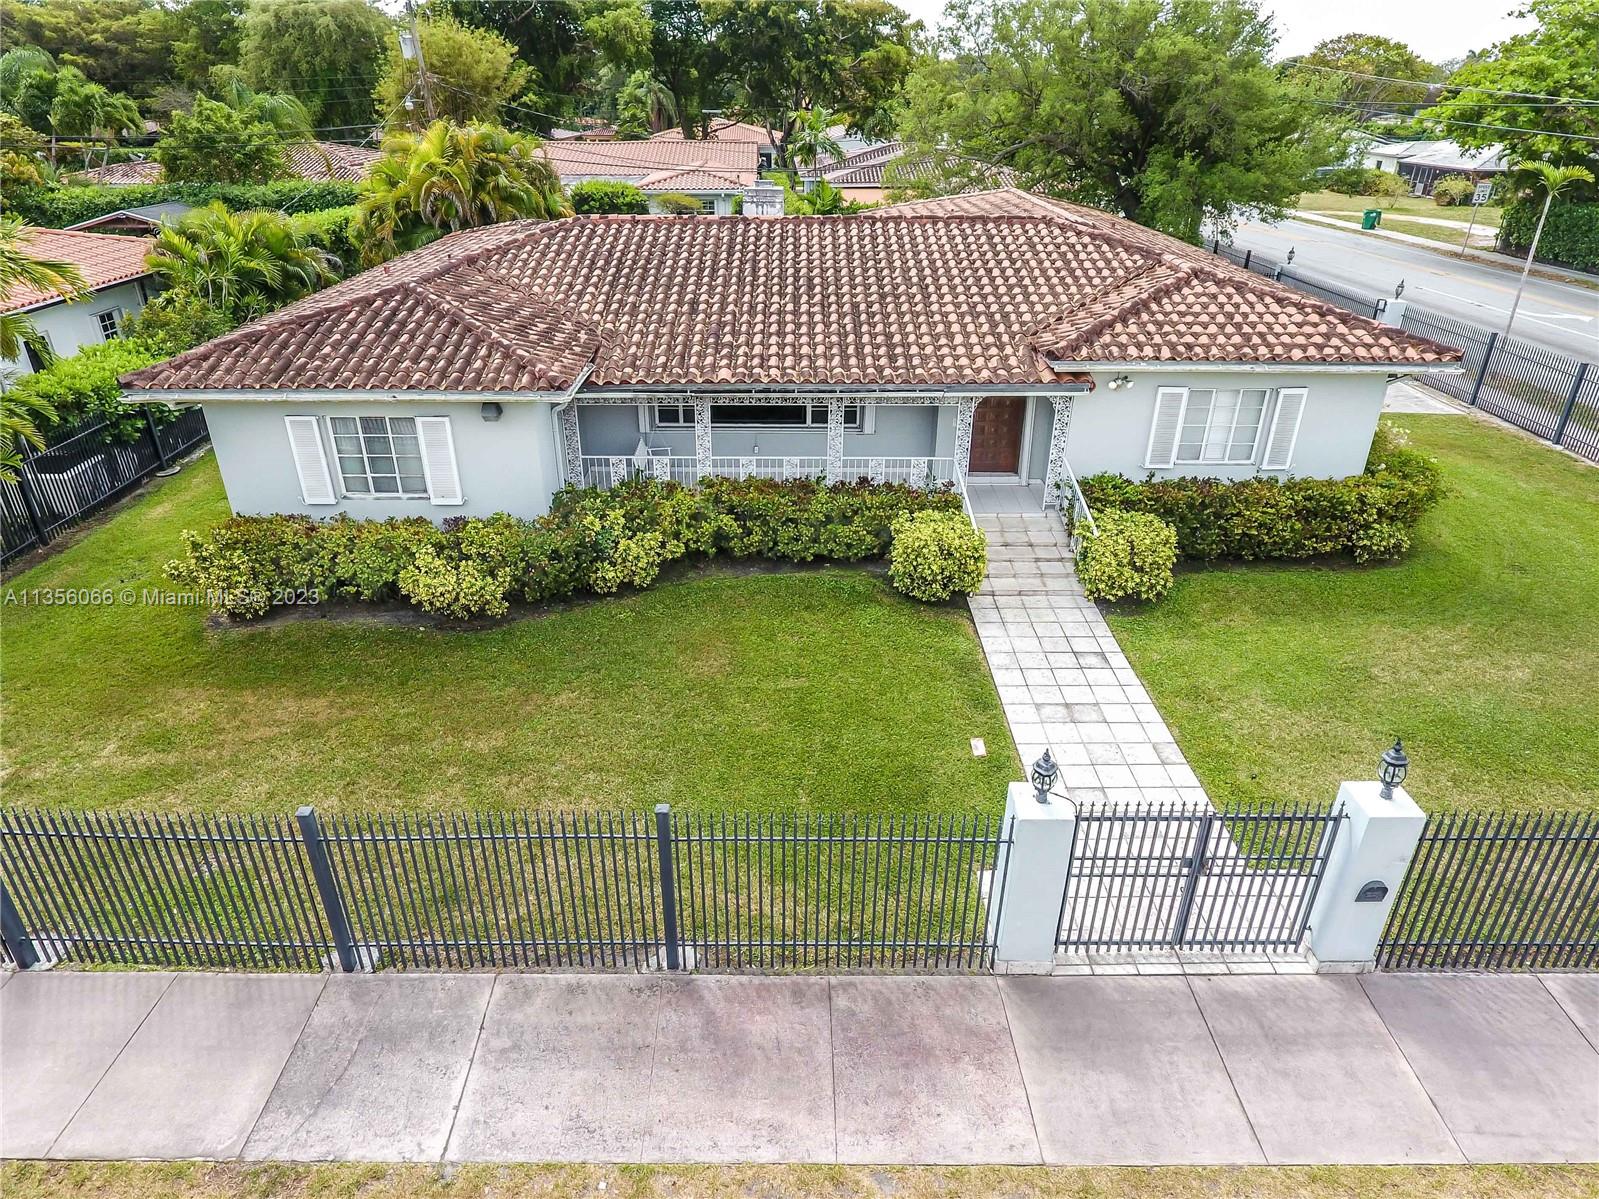 Spacious home in the heart of Coral Gables minutes away from the Biltmore Hotel & Golf Course and St. Theresa Church & School.  3 bedroom 3 bath home with 2,353 sf ready for improvements and modernization.     The home sits in the center of a large 12,725 sf fenced in lot with front door facing Sevilla and garage entrance off of 57th Avenue.   Back yard has plenty of space for a pool and patio for entertaining and enjoyment.    Please do not miss the opportunity to make this home your own.  Call for appointment and see open house schedule.